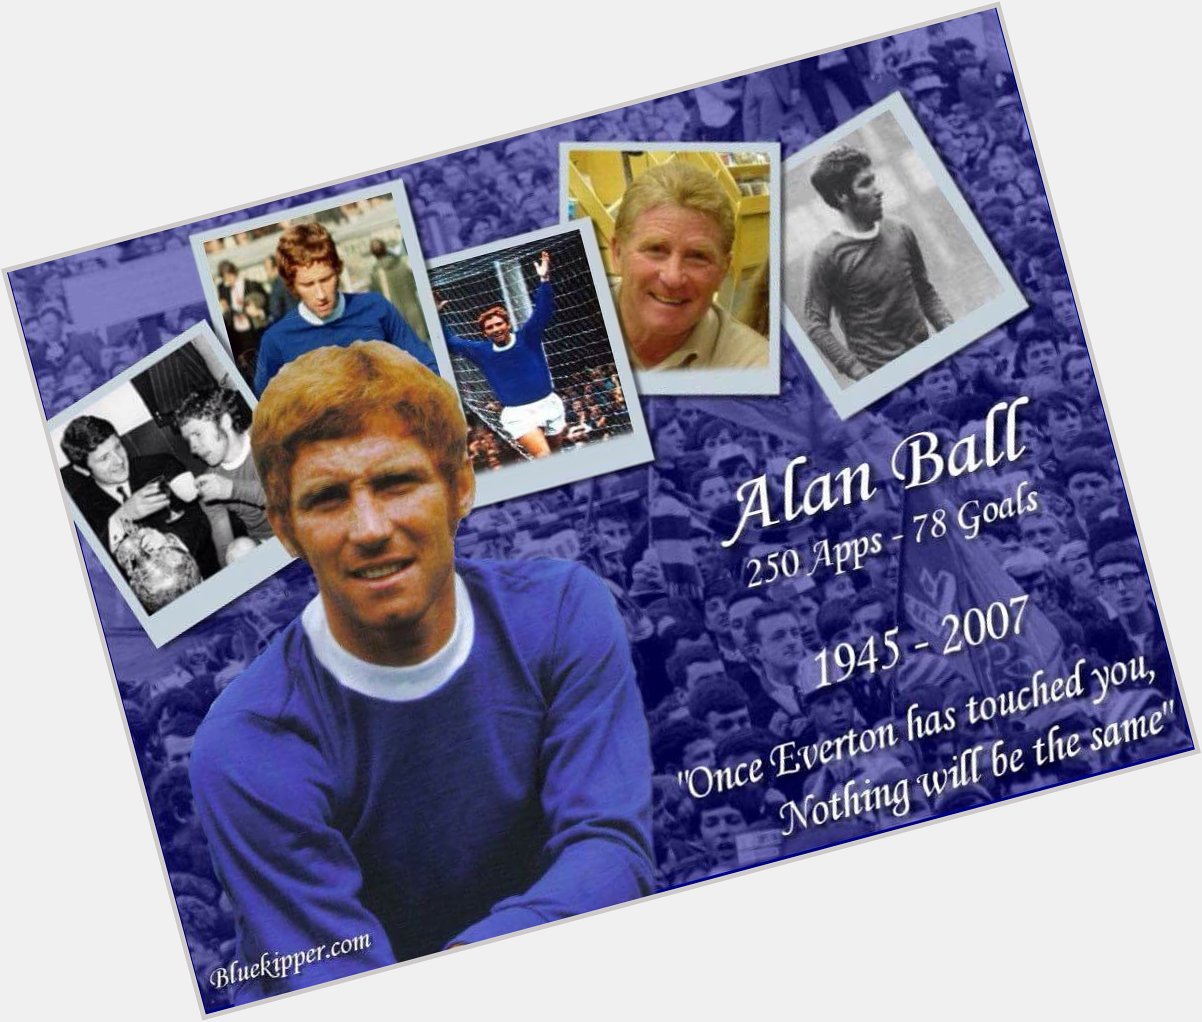 Happy birthday to a proper blue legend Little curly Alan Ball so missed the great man 